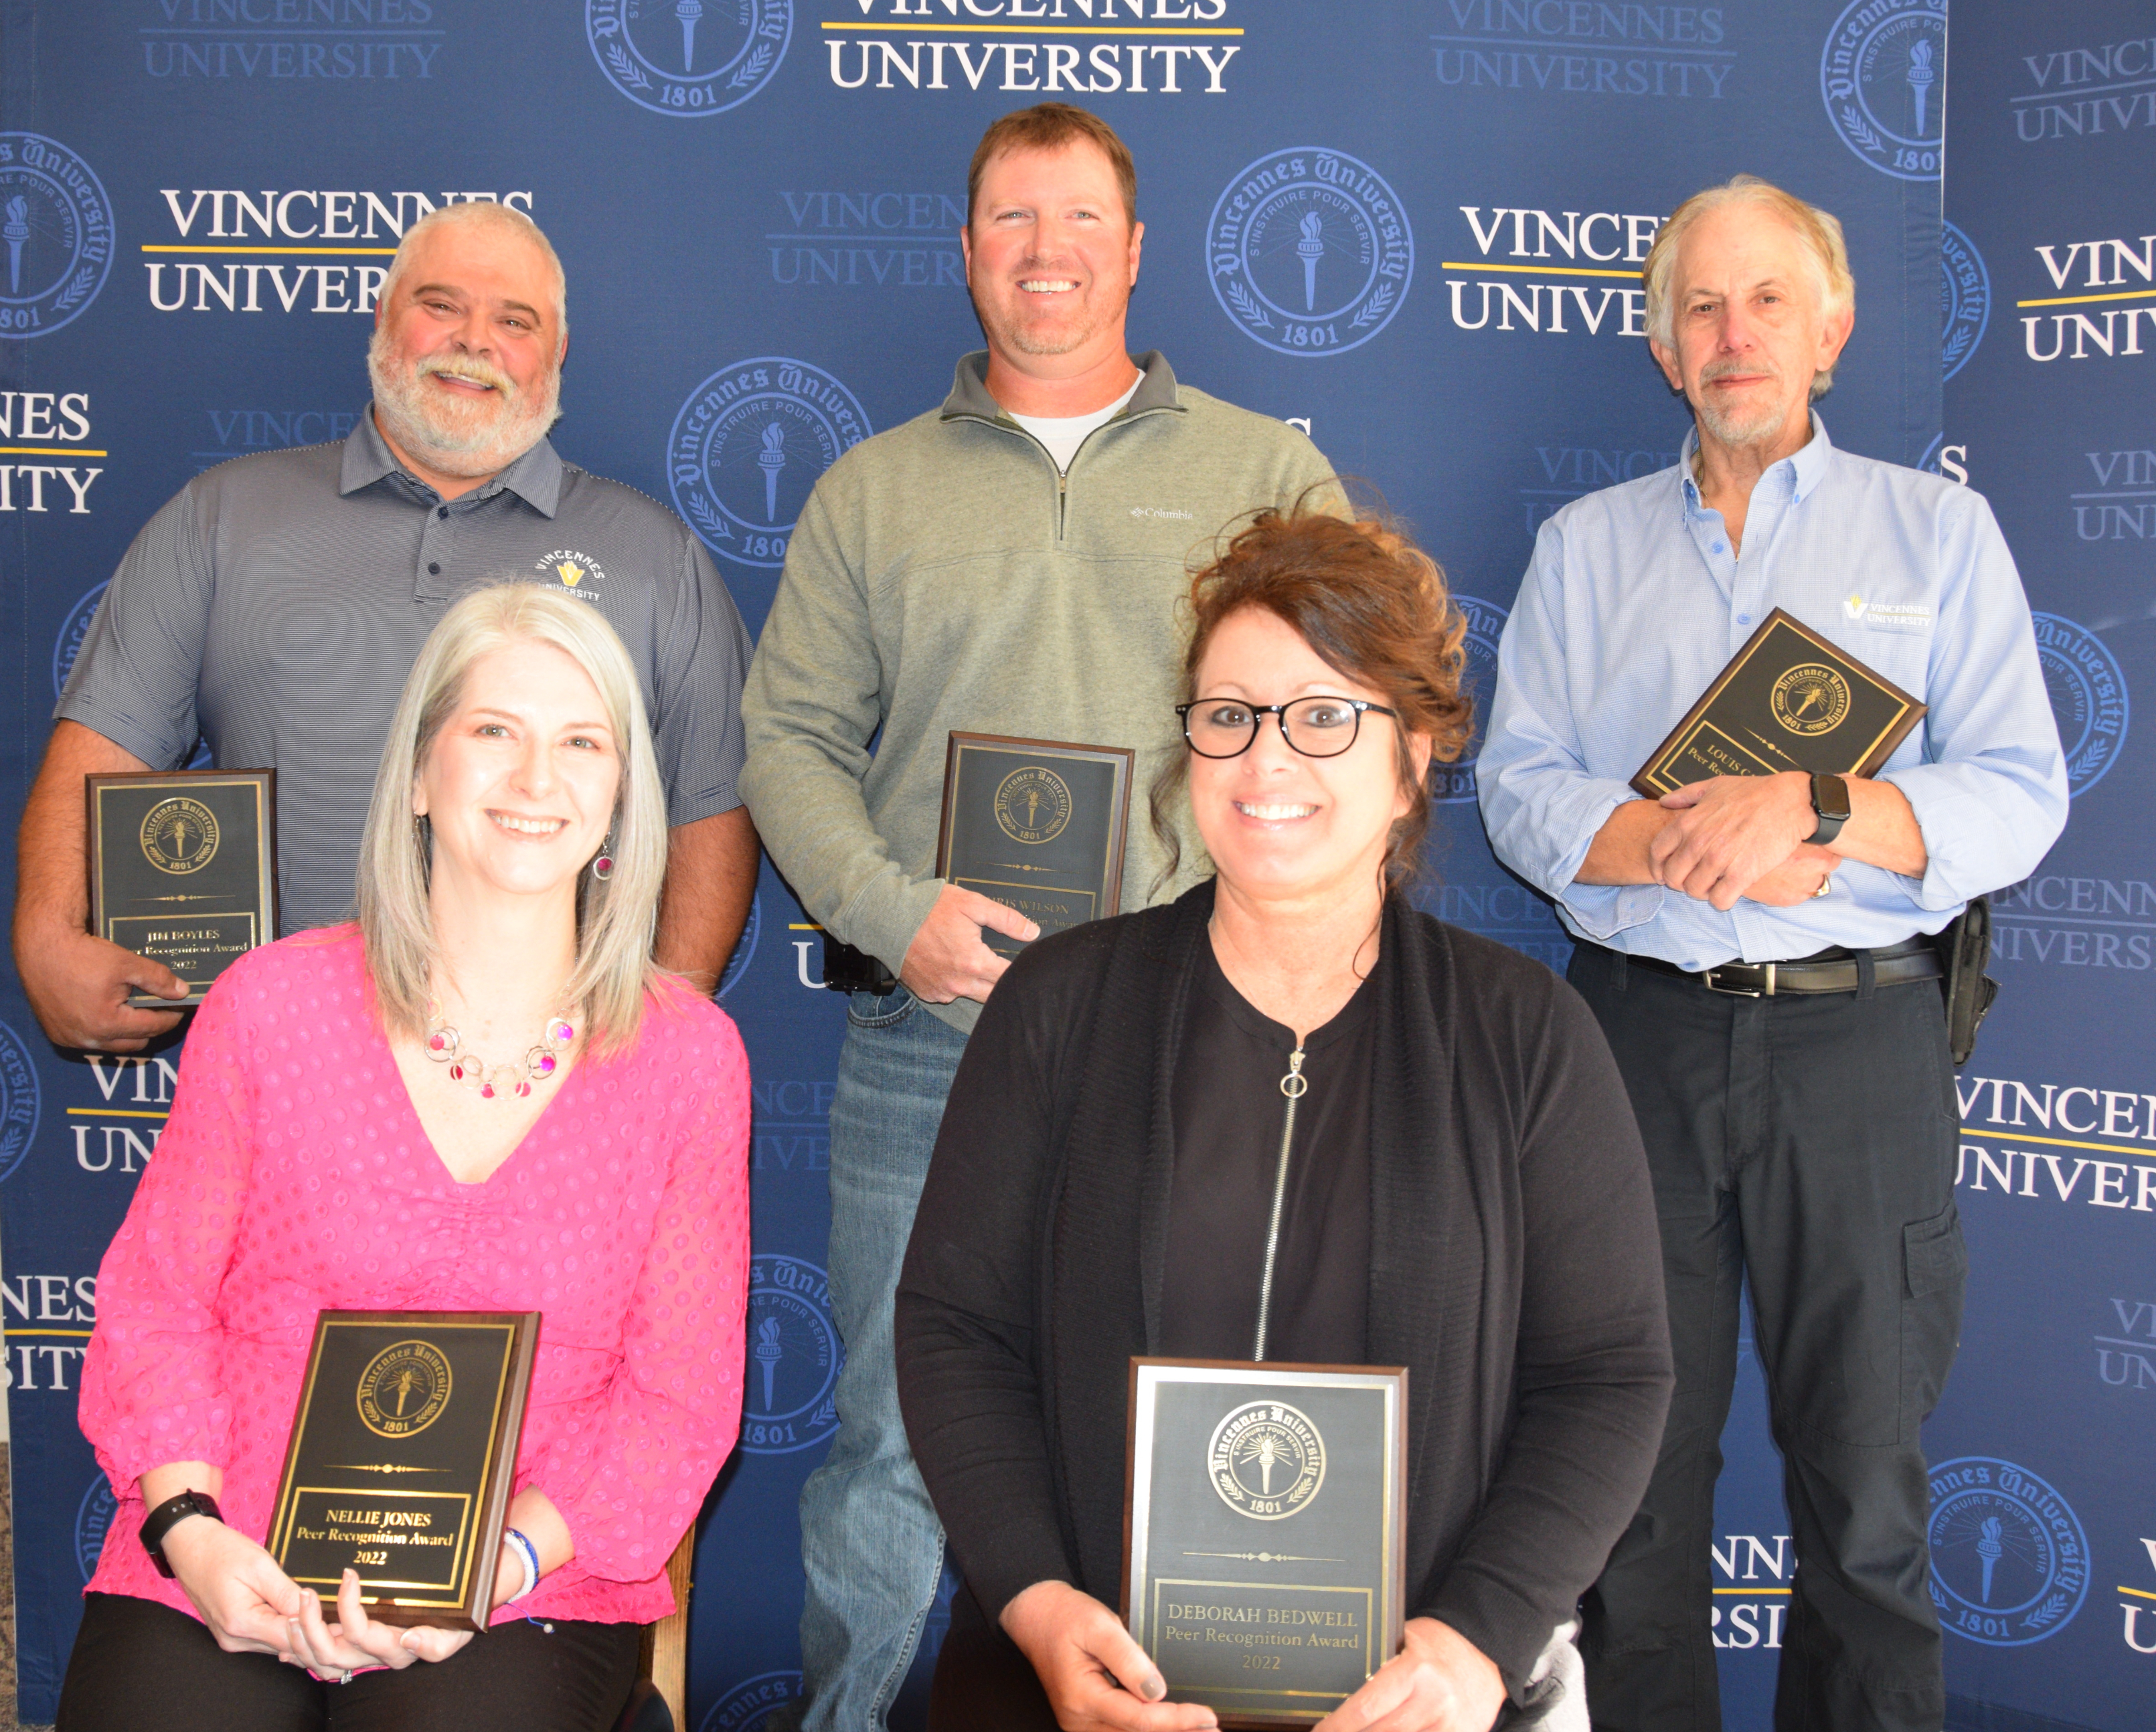 Five 2022 Peer Recognition Award recipients pose together with their awards in front of a VU backdrop